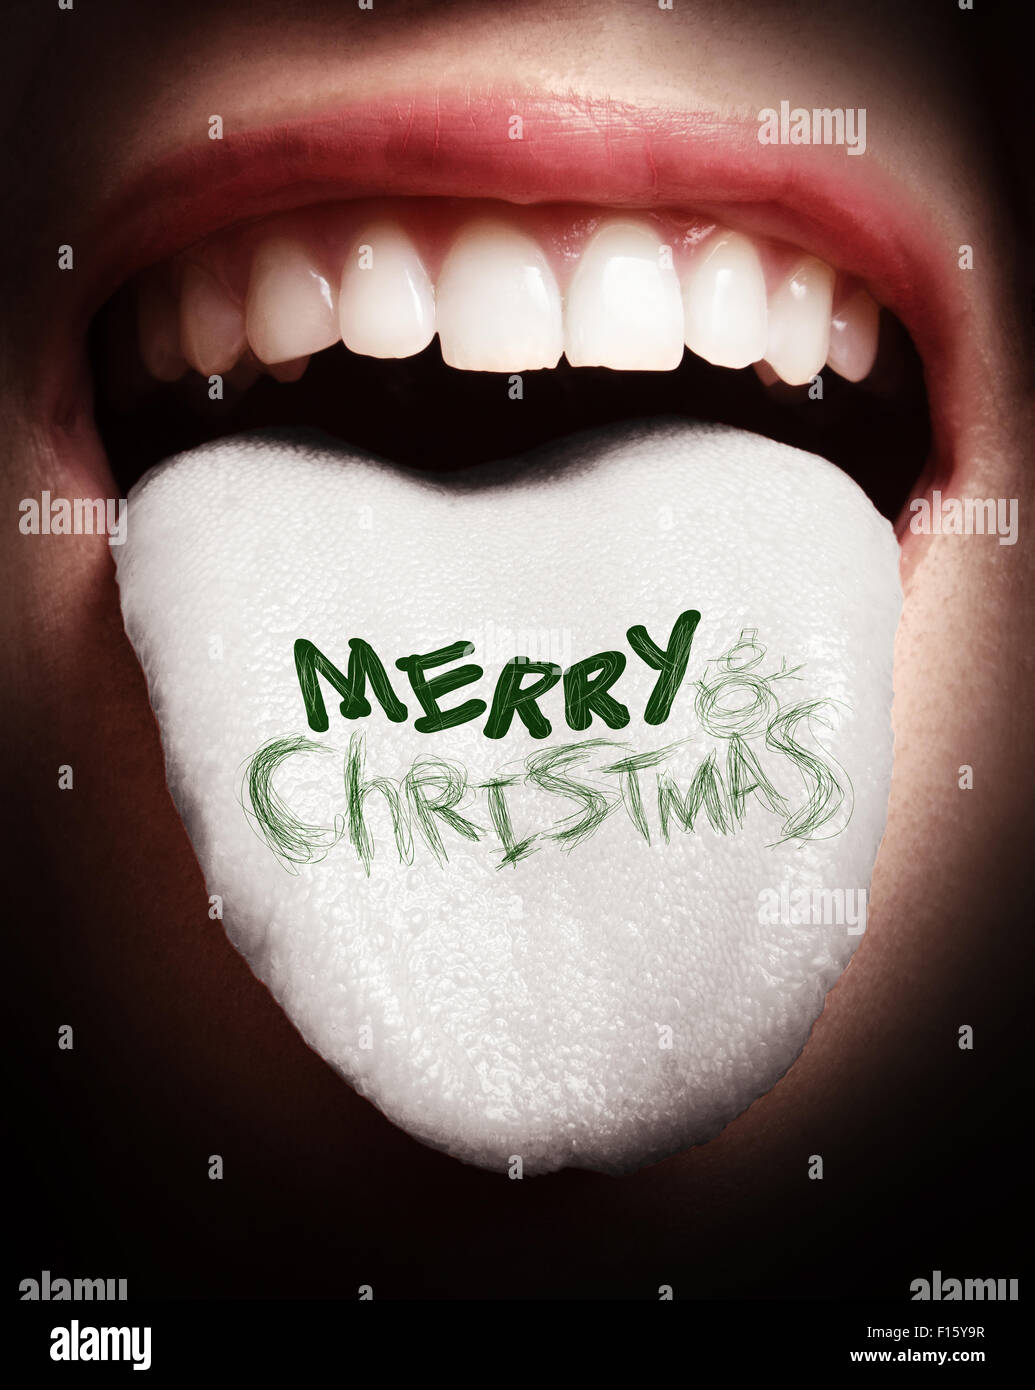 woman with open mouth spreading tongue colored in merry christmas icon as concept Stock Photo